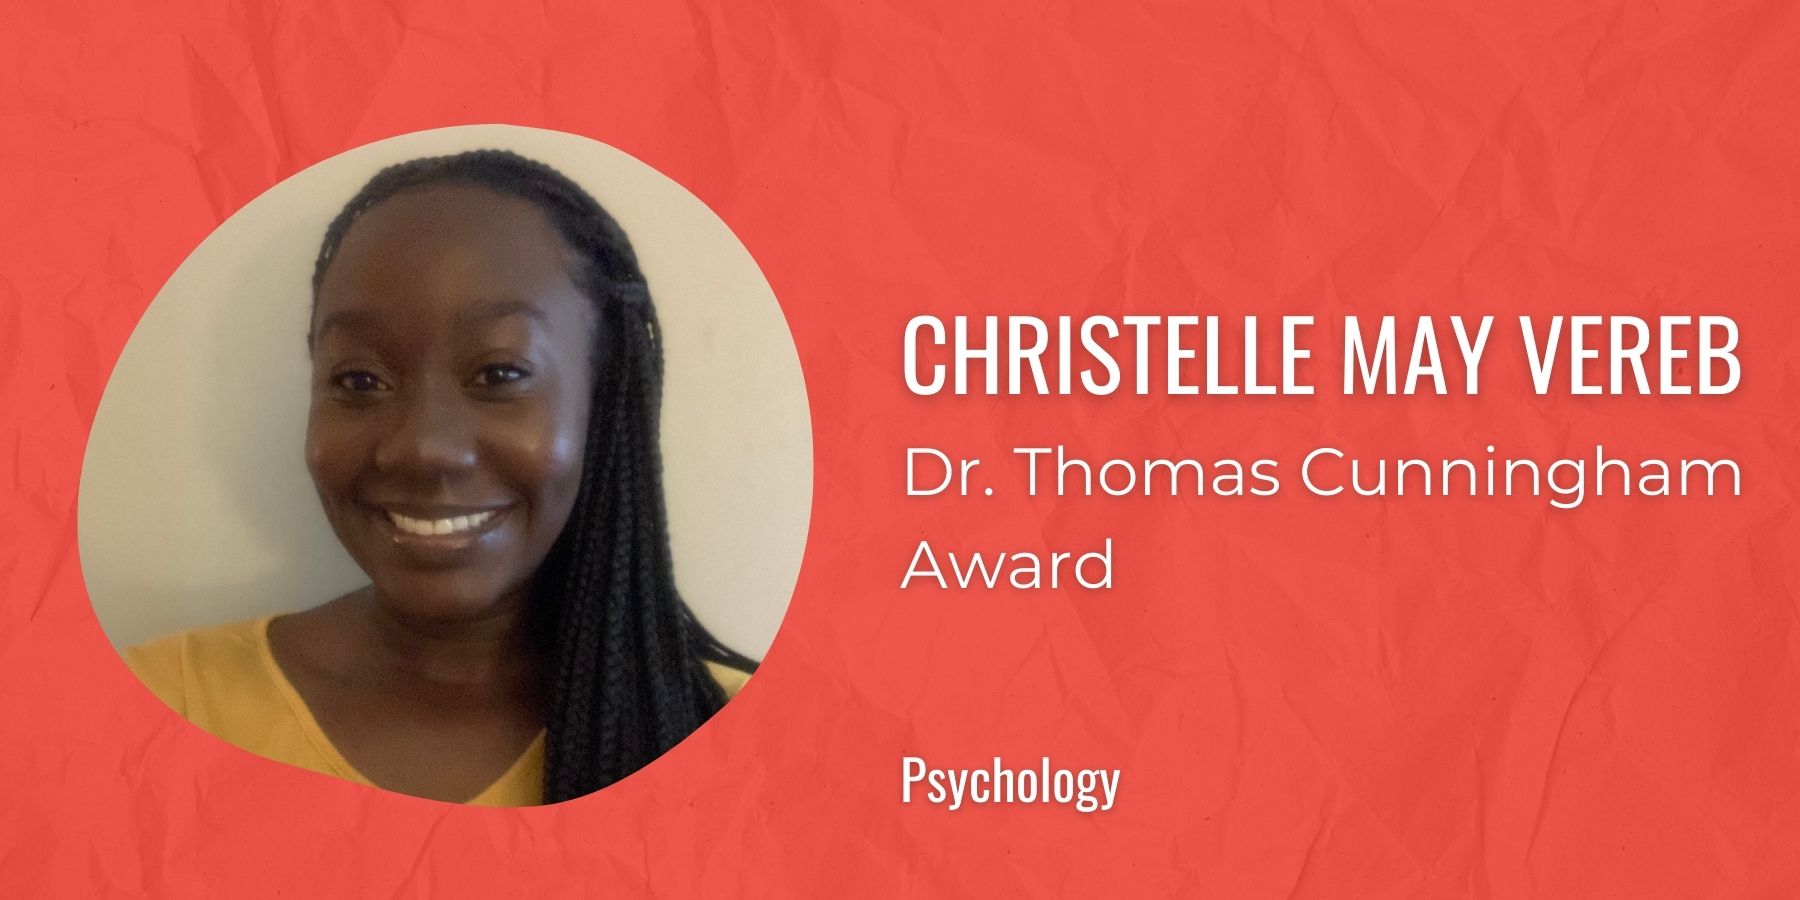 Image of Christelle May Vereb with text: Dr. Thomas Cunningham award, Psychology
